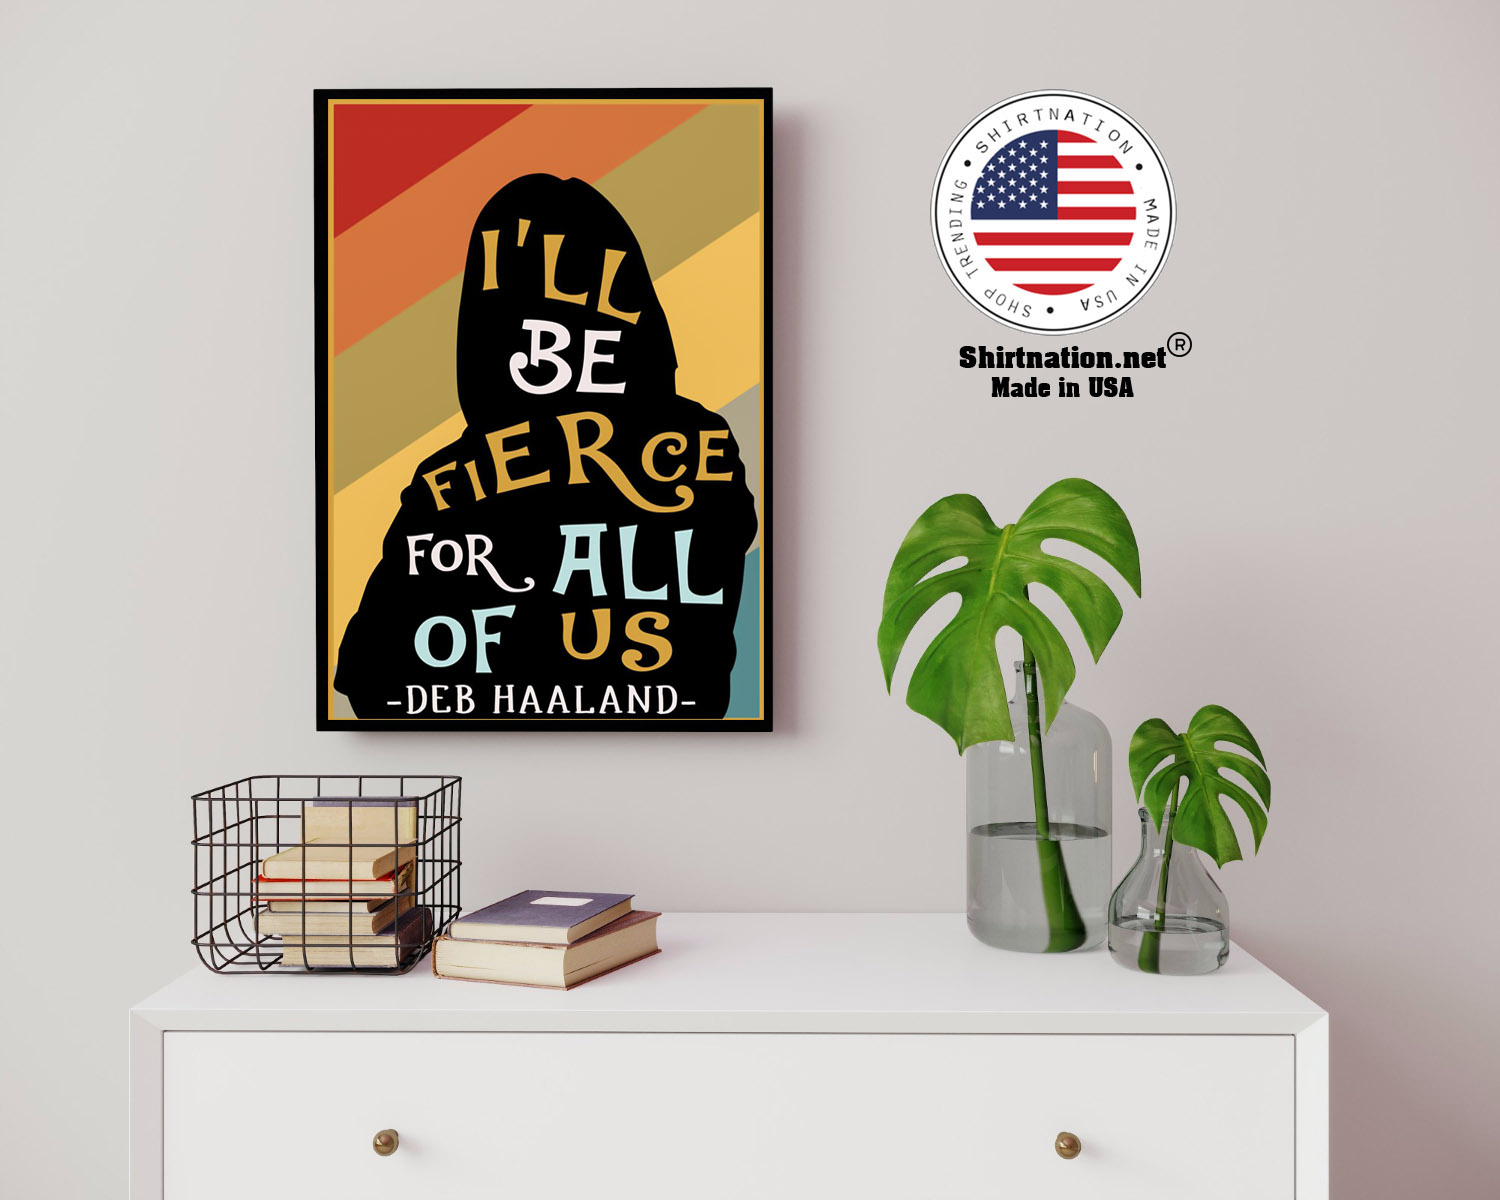 Ill be fierce for all of us deb haaland poster 14